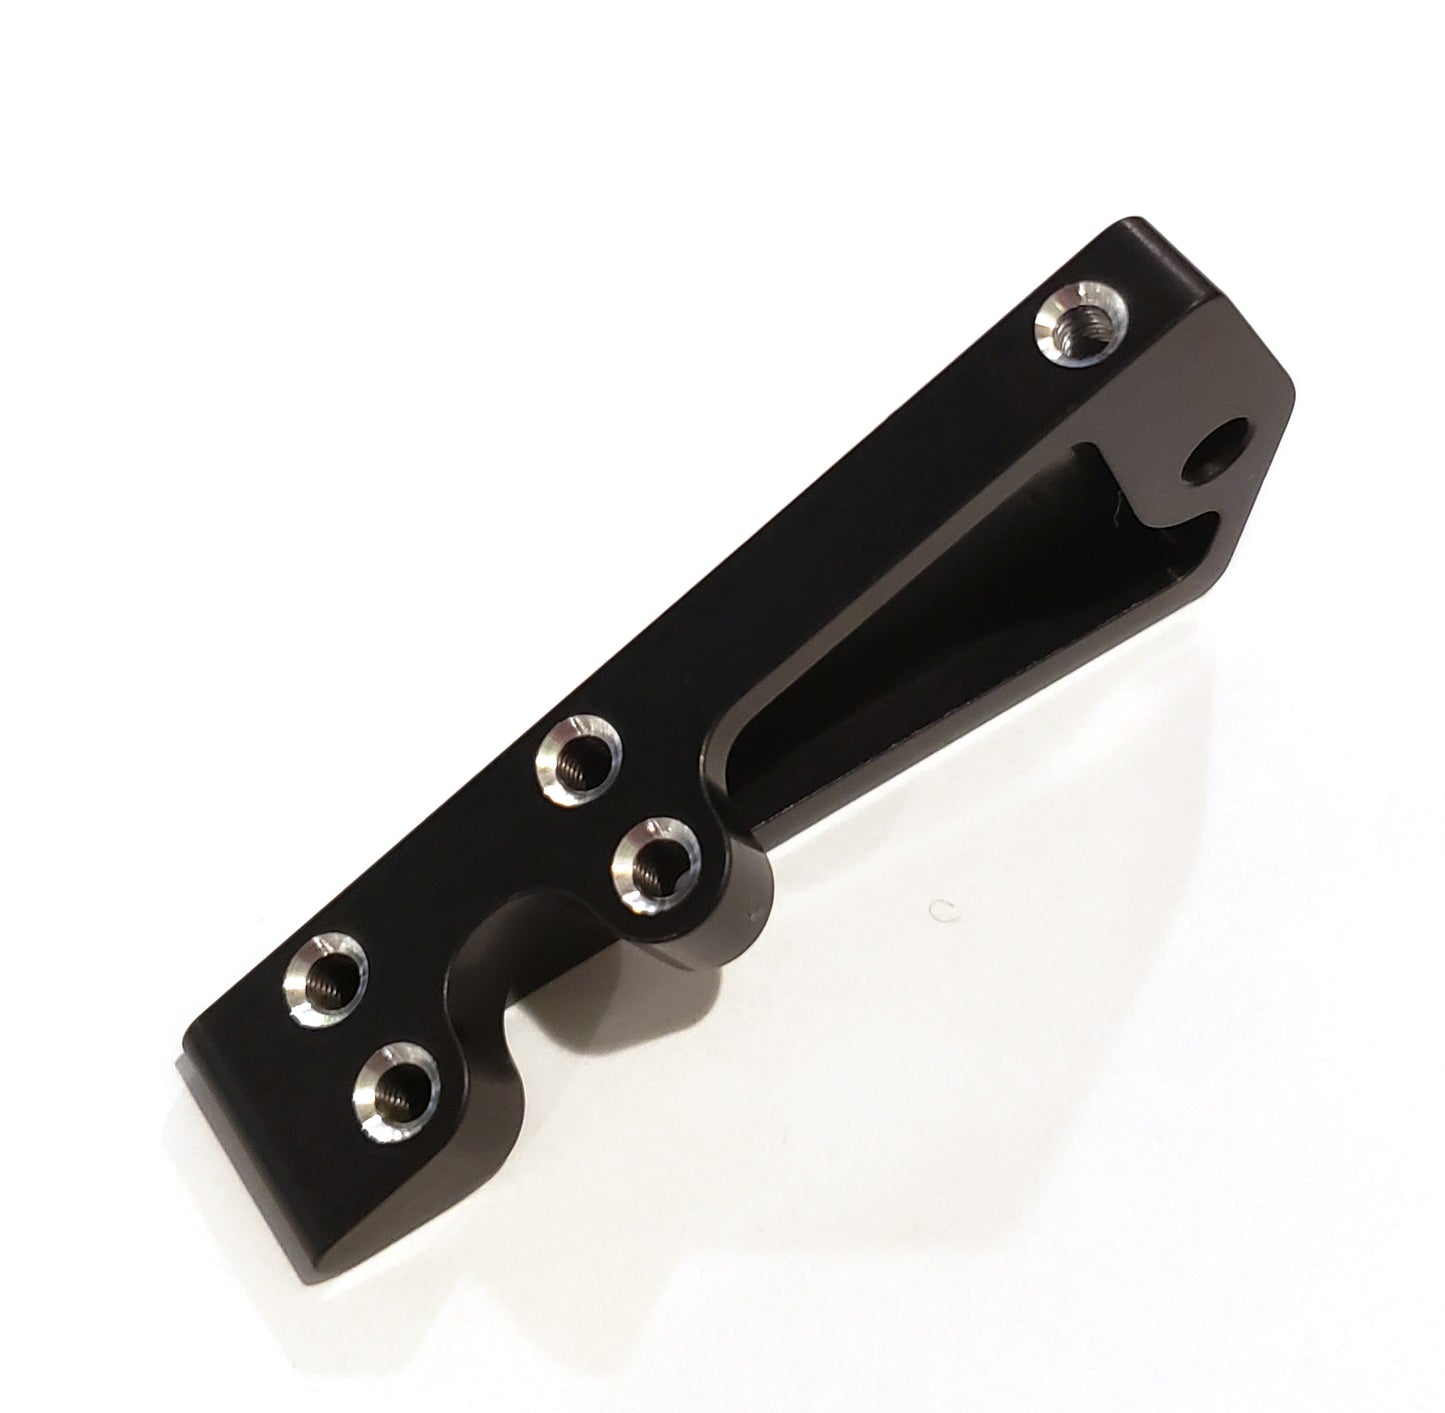 Candy Wasp Wedge Mount Set